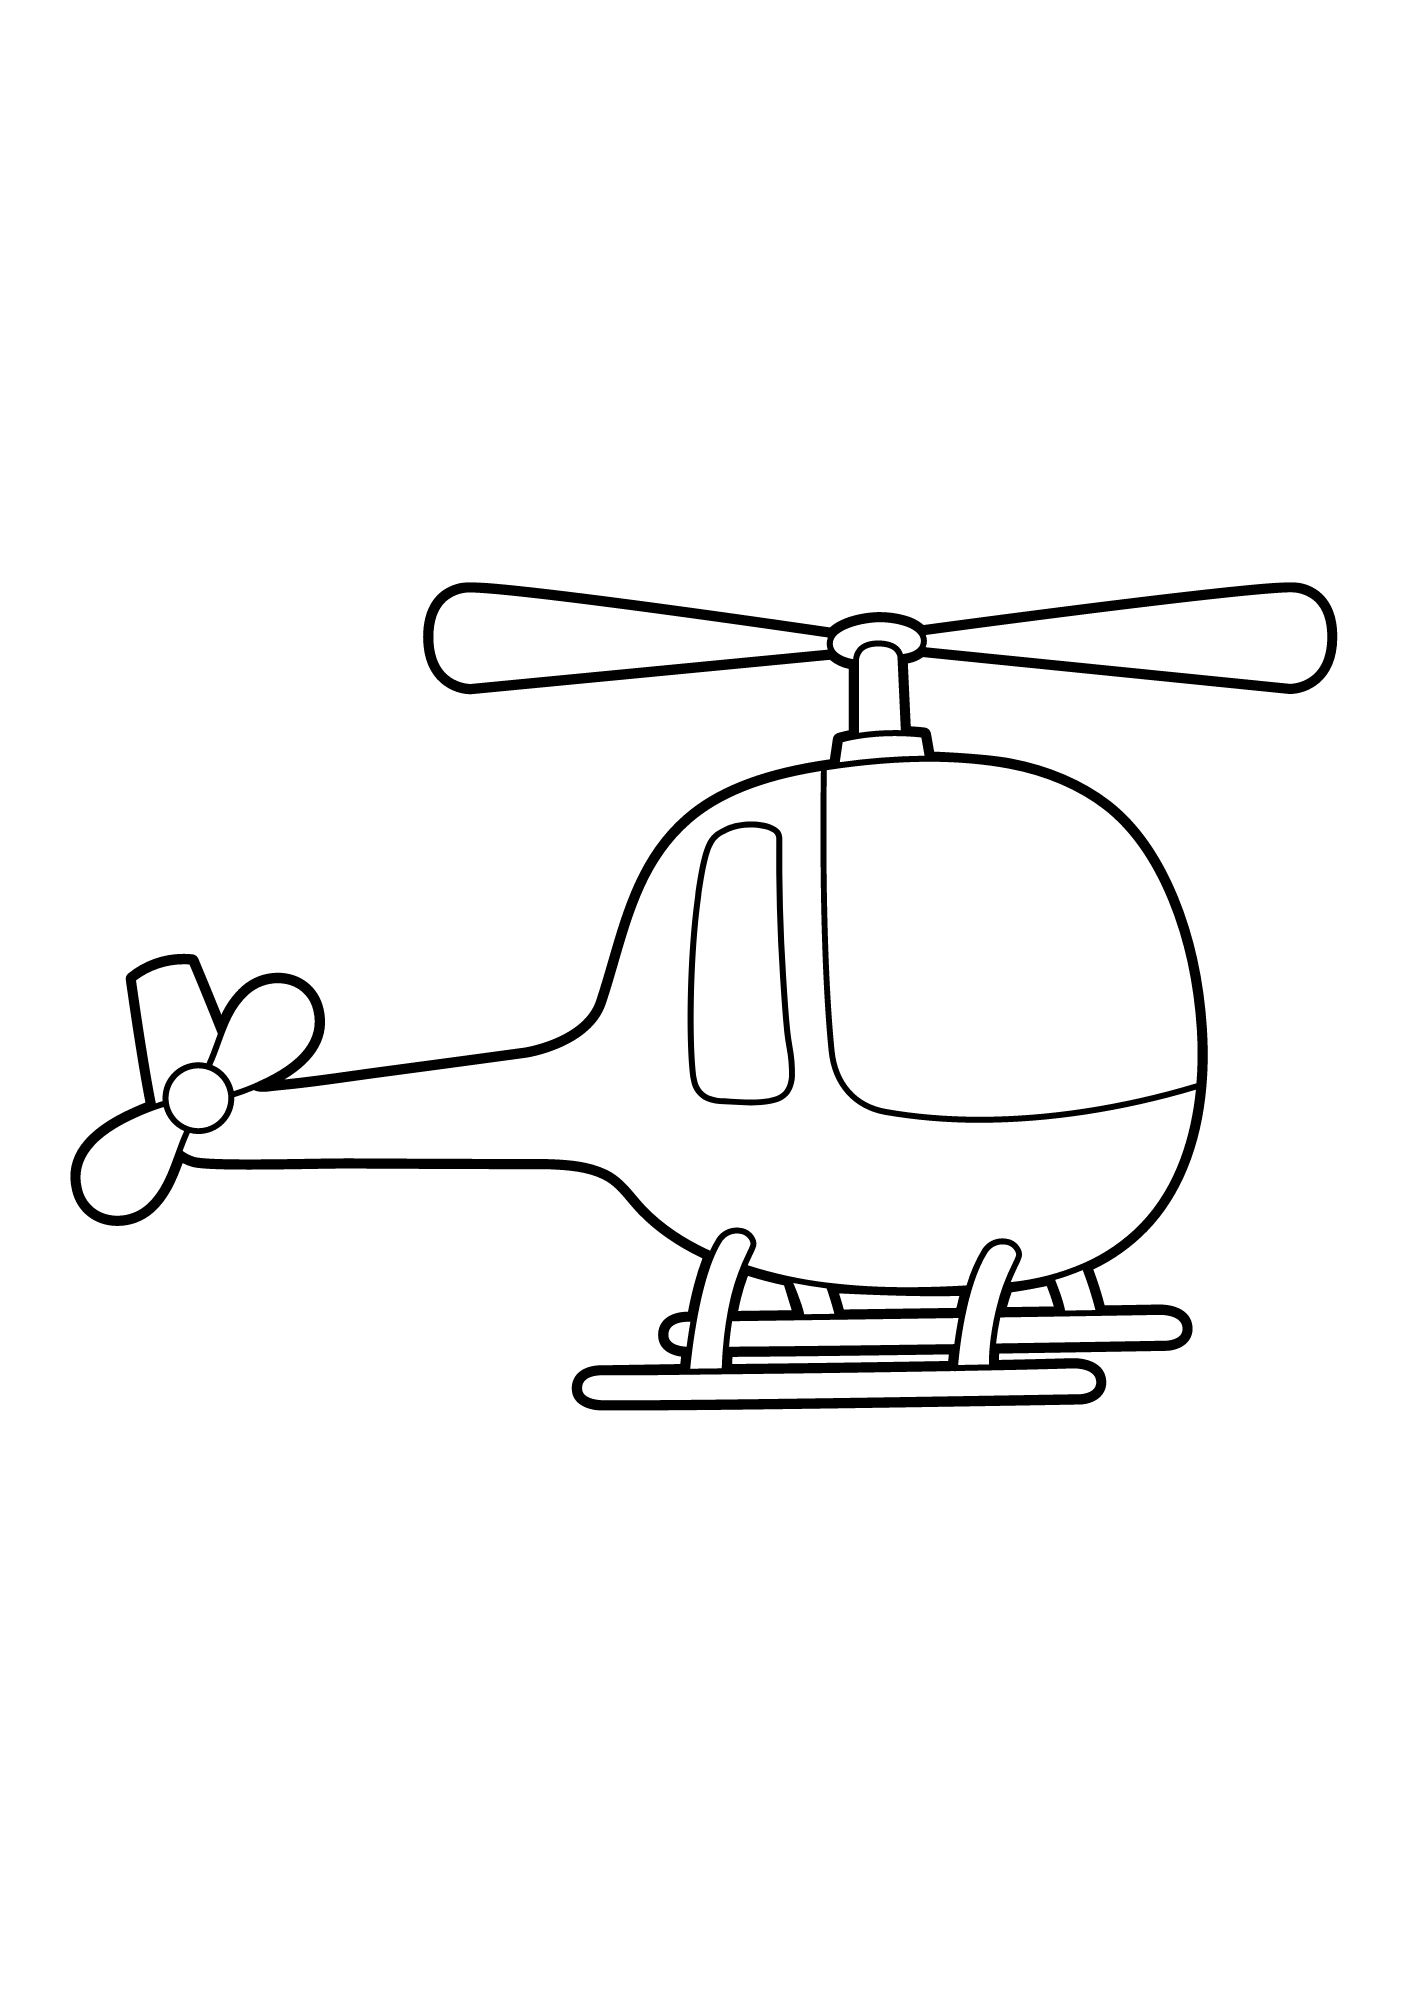 Helicopter For Children Coloring Pages